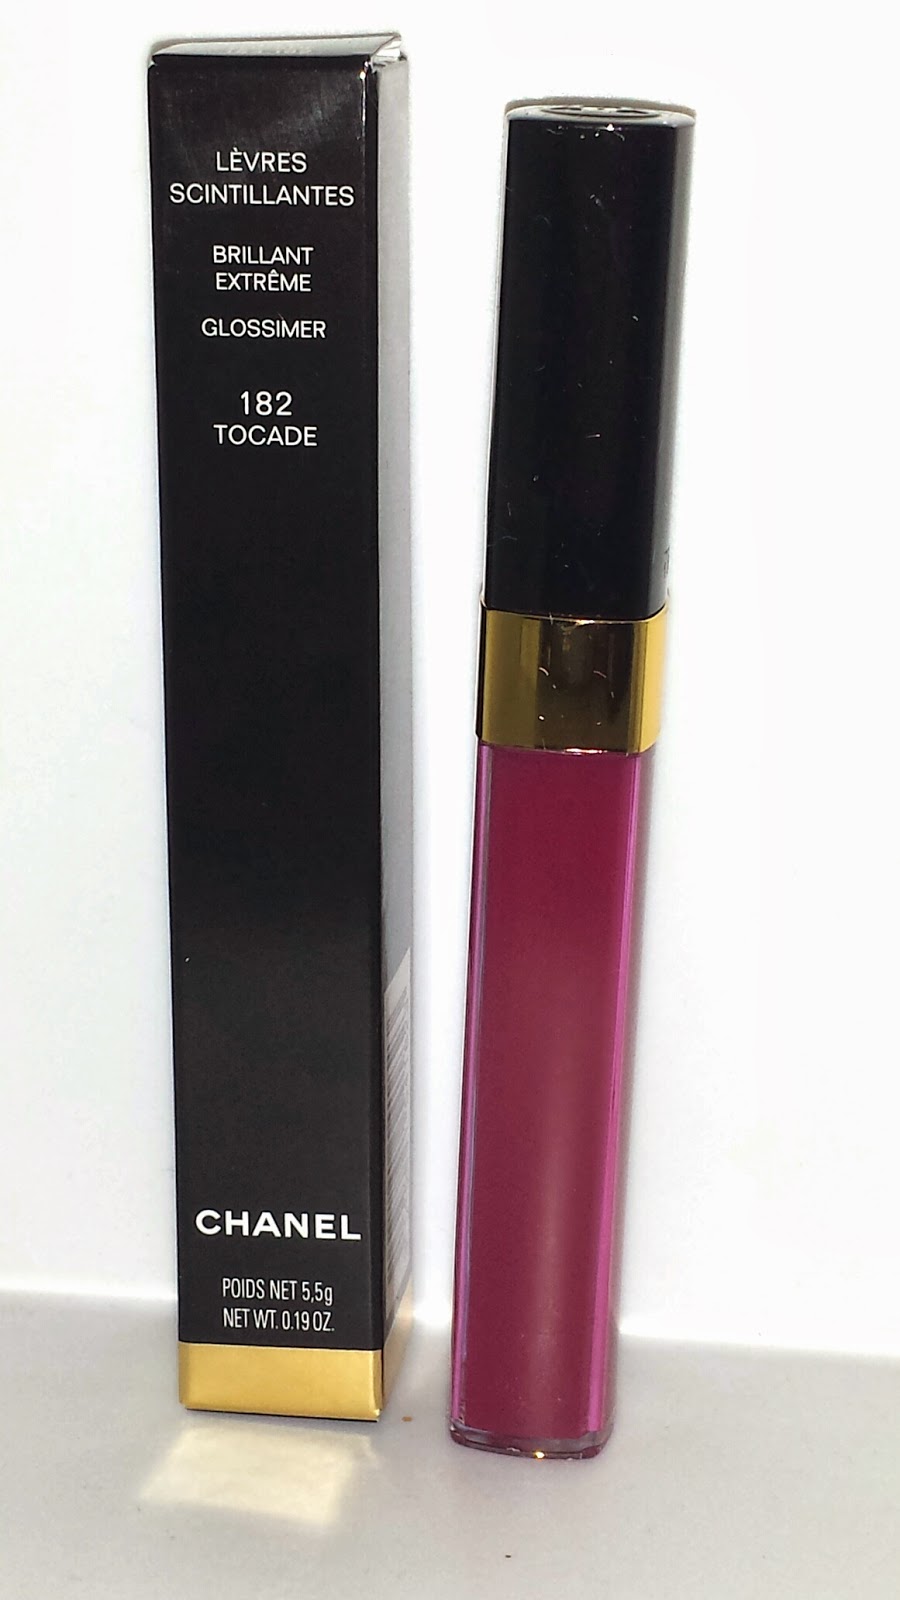 Jayded Dreaming Beauty Blog 182 TOCADE CHANEL SCINTILLANTES GLOSSIMER - AND REVIEW